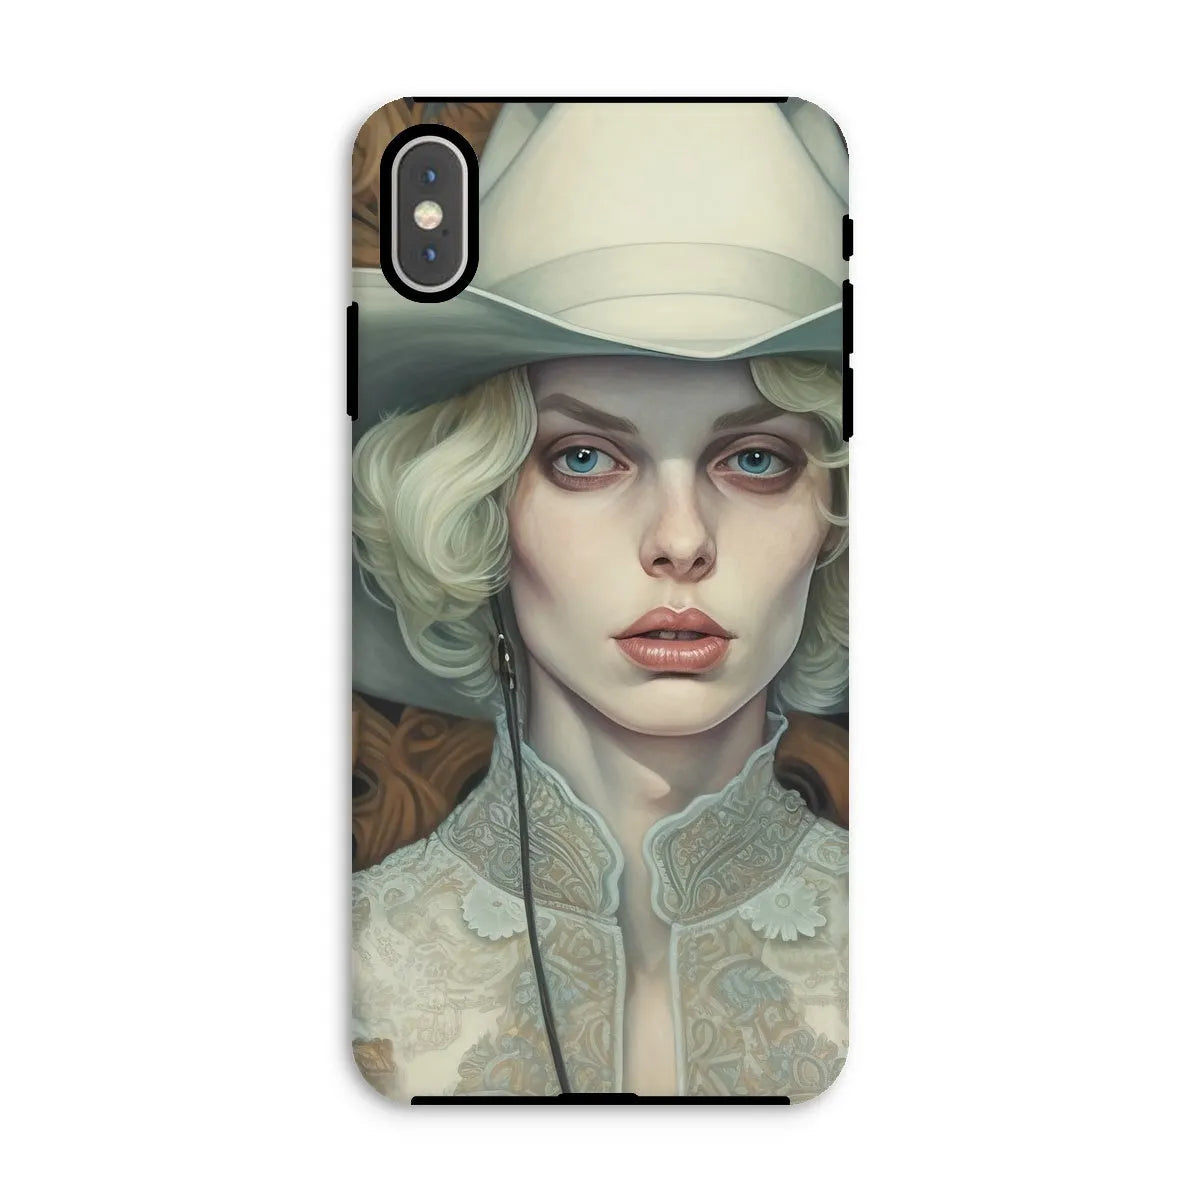 Winnie The Lesbian Cowgirl - Sapphic Art Phone Case - Iphone Xs Max / Matte - Mobile Phone Cases - Aesthetic Art